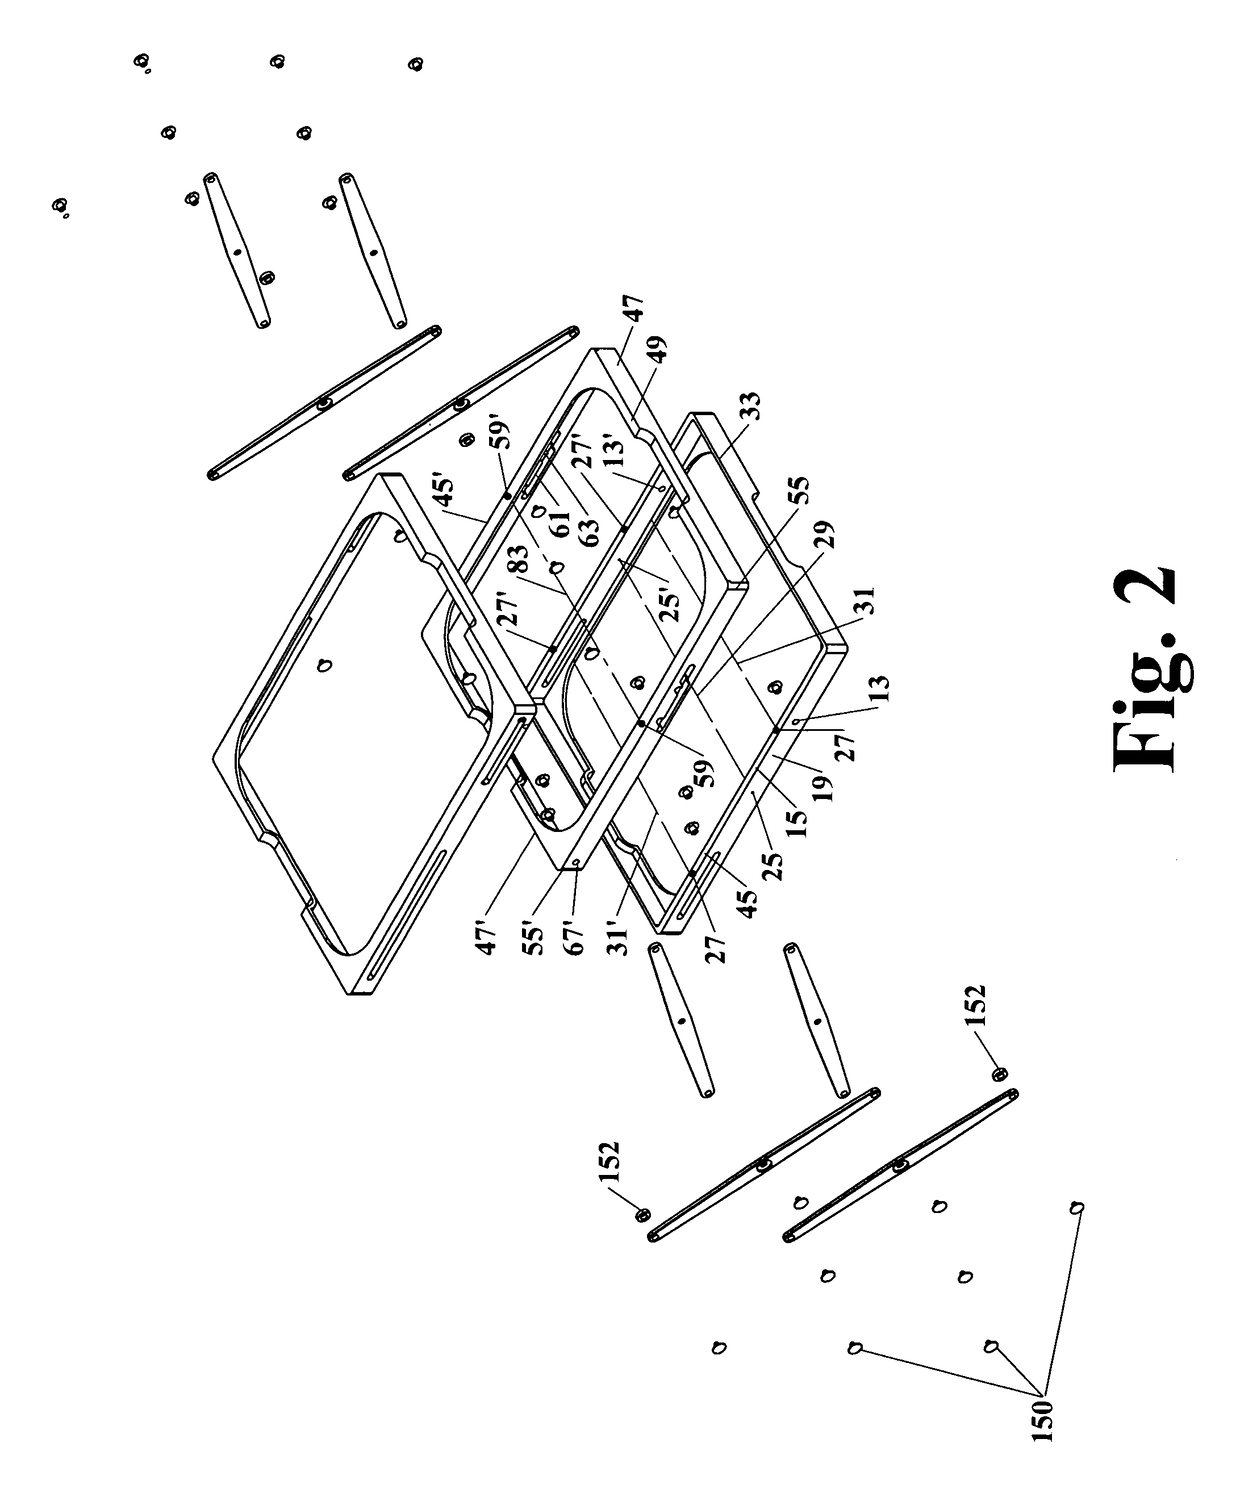 Multi-level serving tray carrier